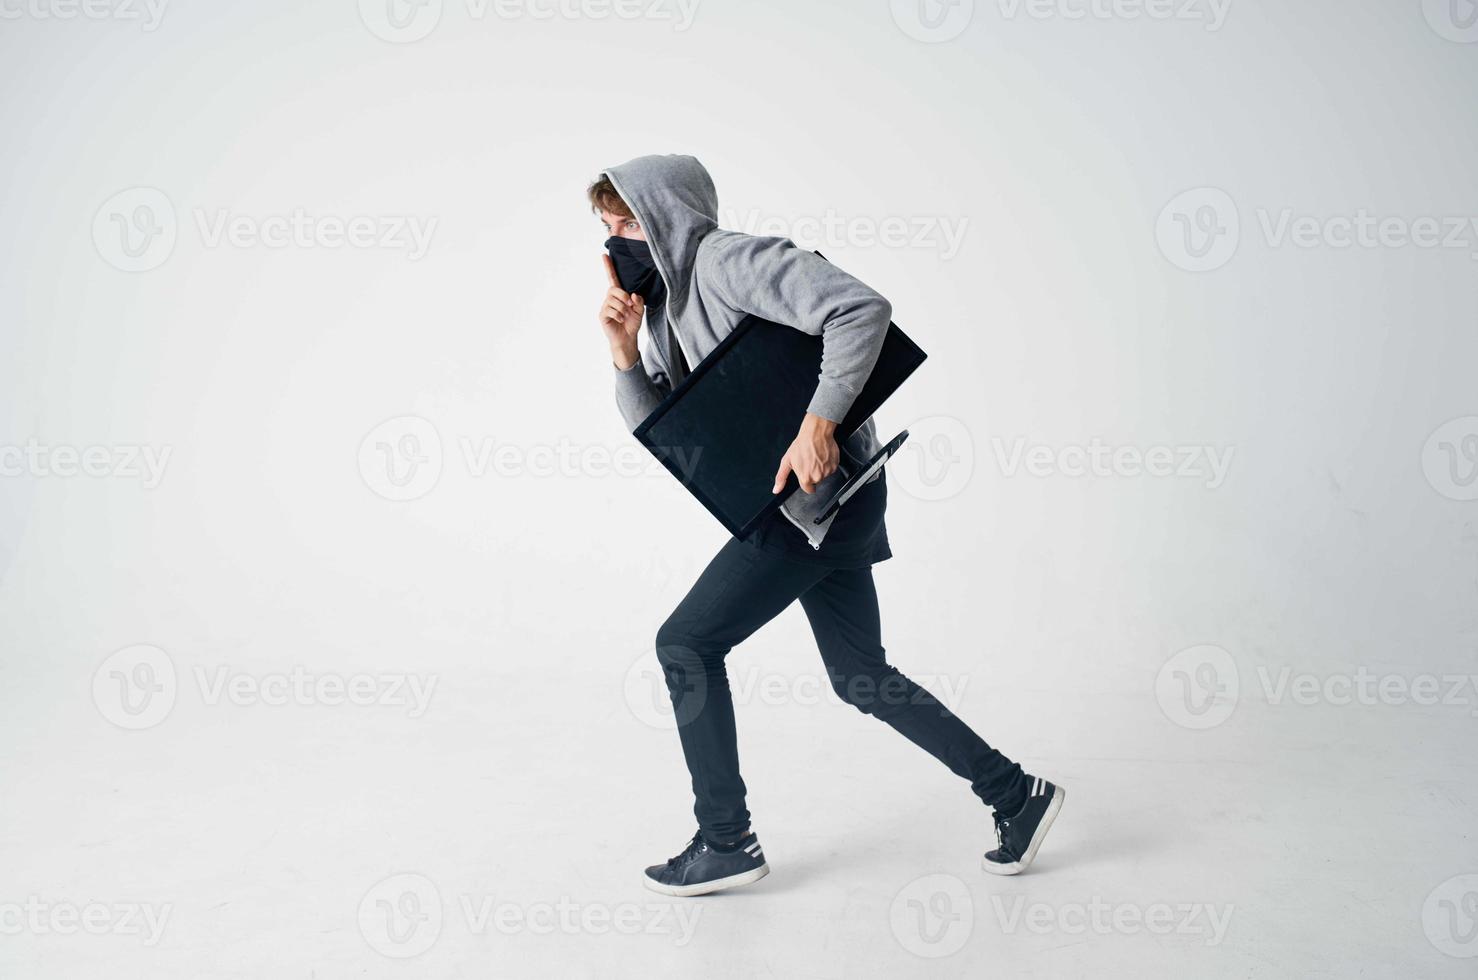 masked man stealth technique robbery safety hooligan light background photo